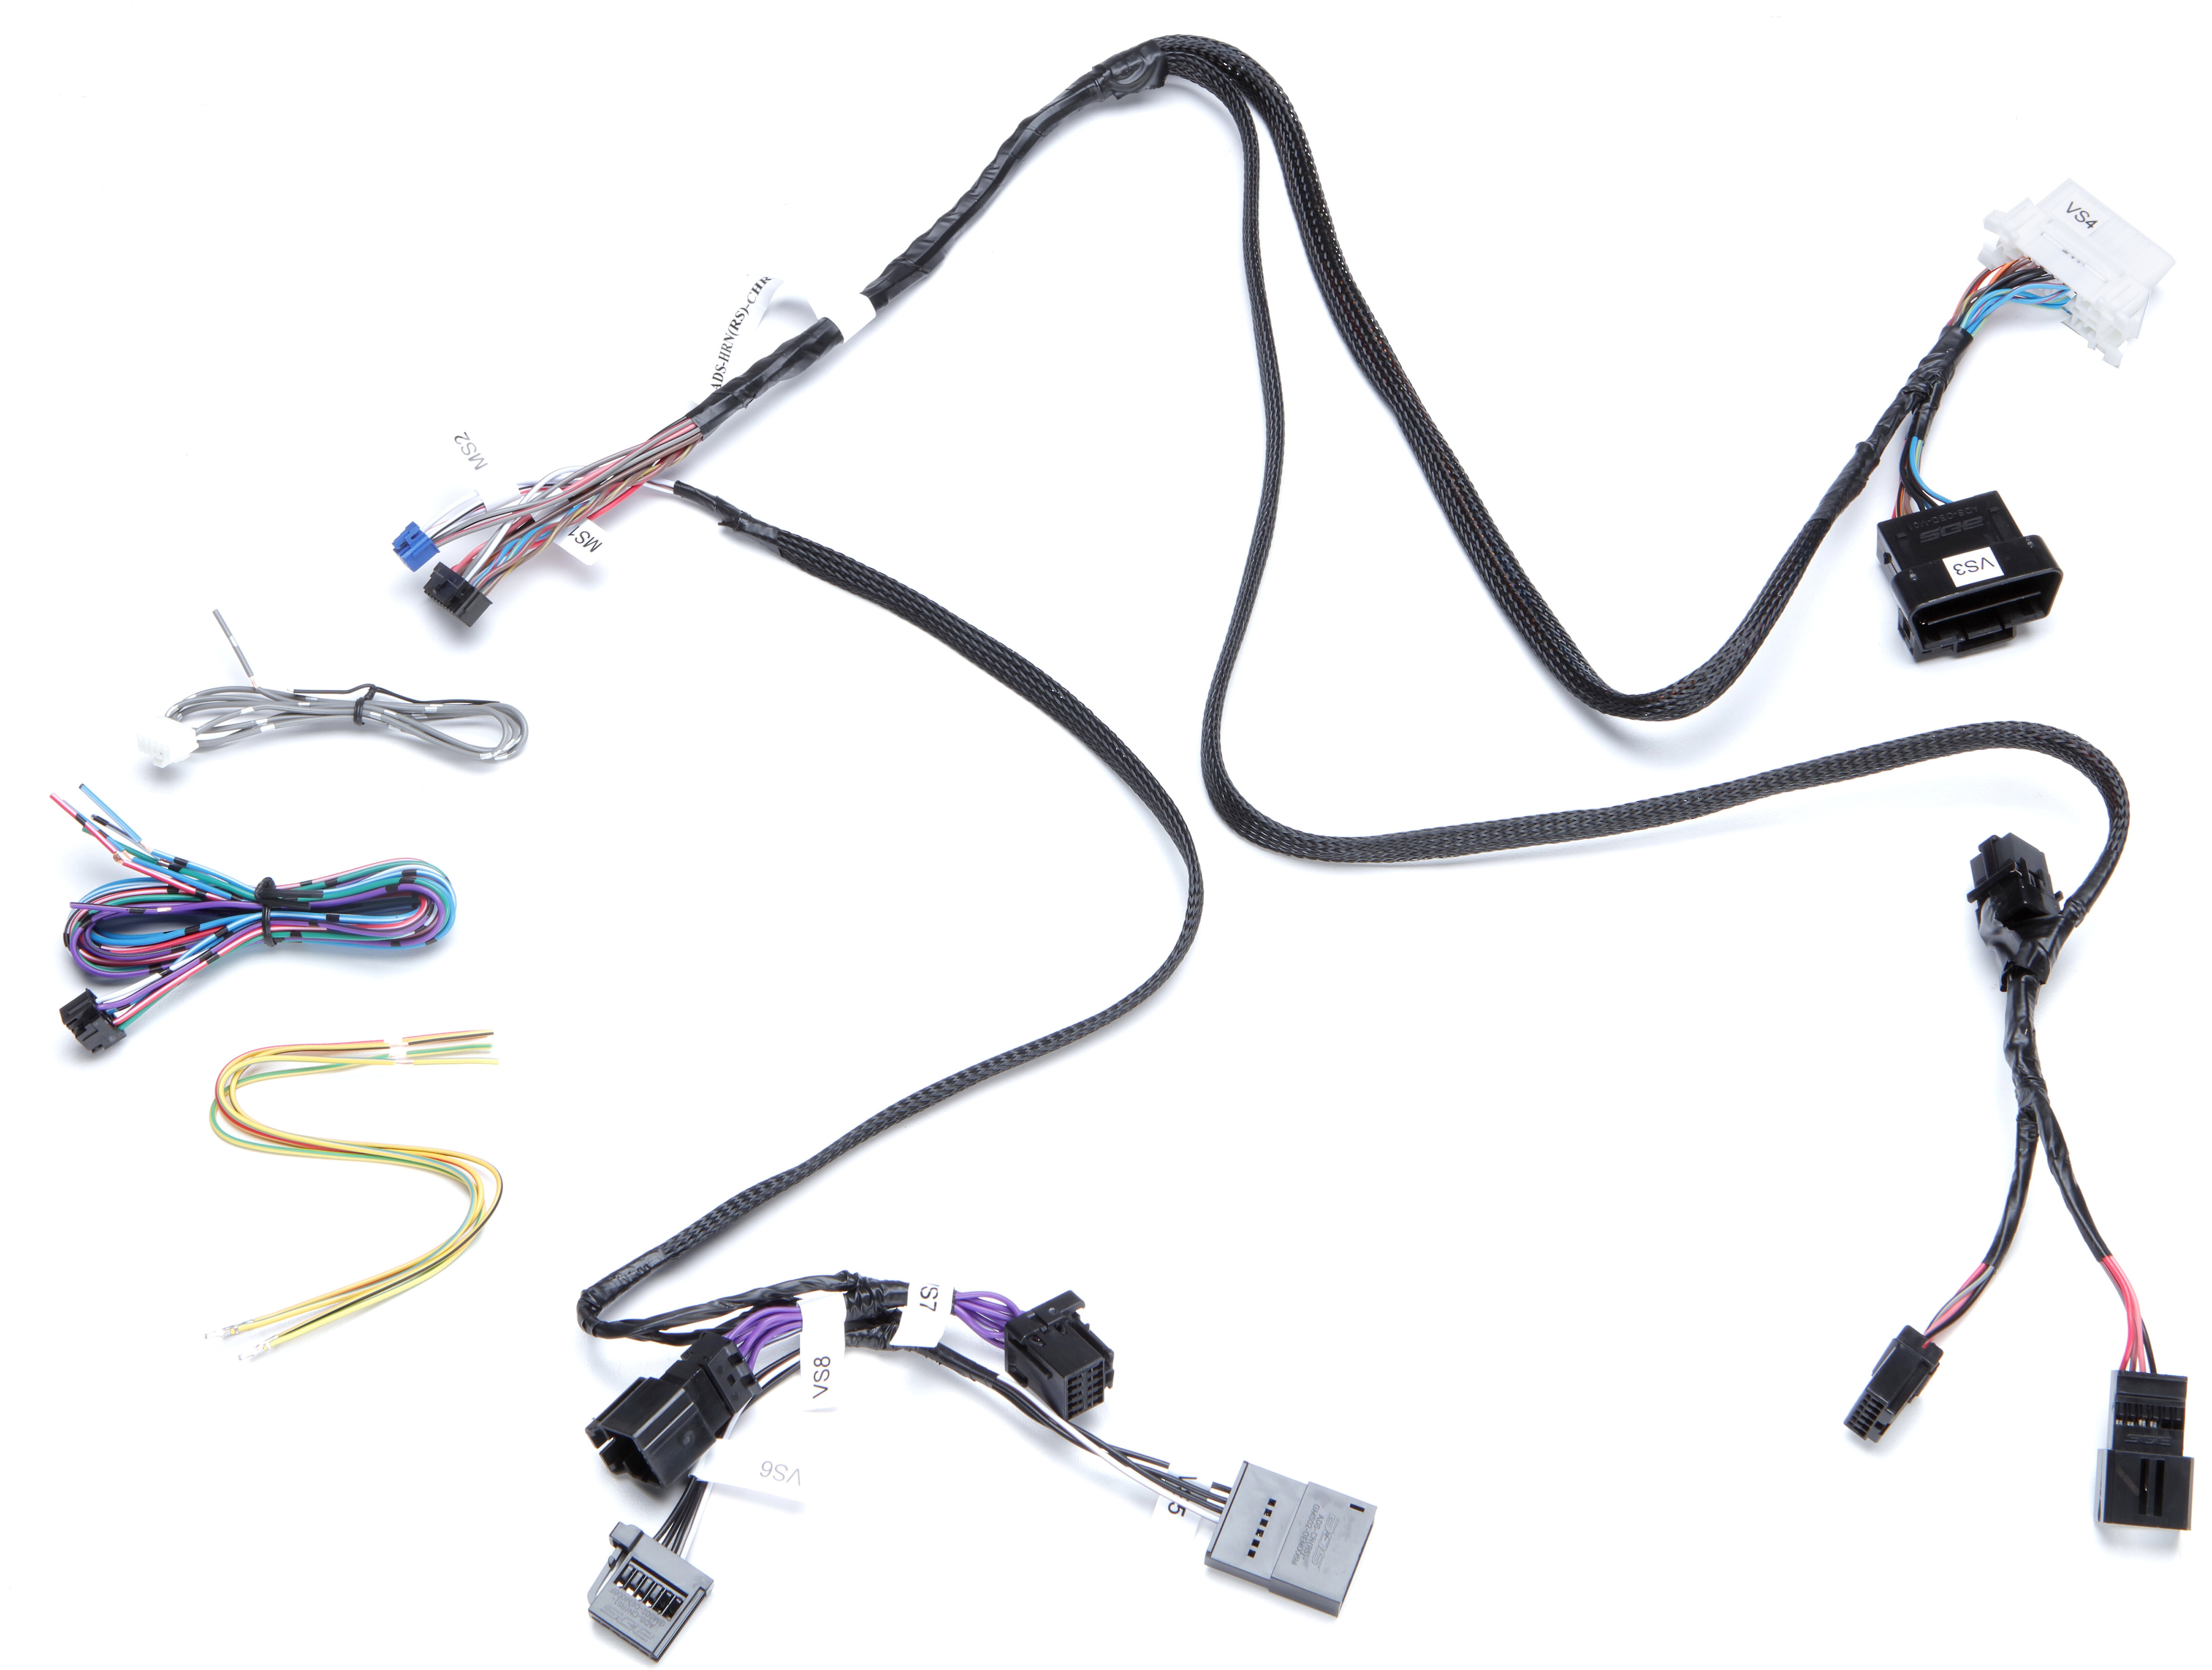 Viper Ds4 Wiring Diagram Vehicle Specific Harnesses at Crutchfield Of Viper Ds4 Wiring Diagram